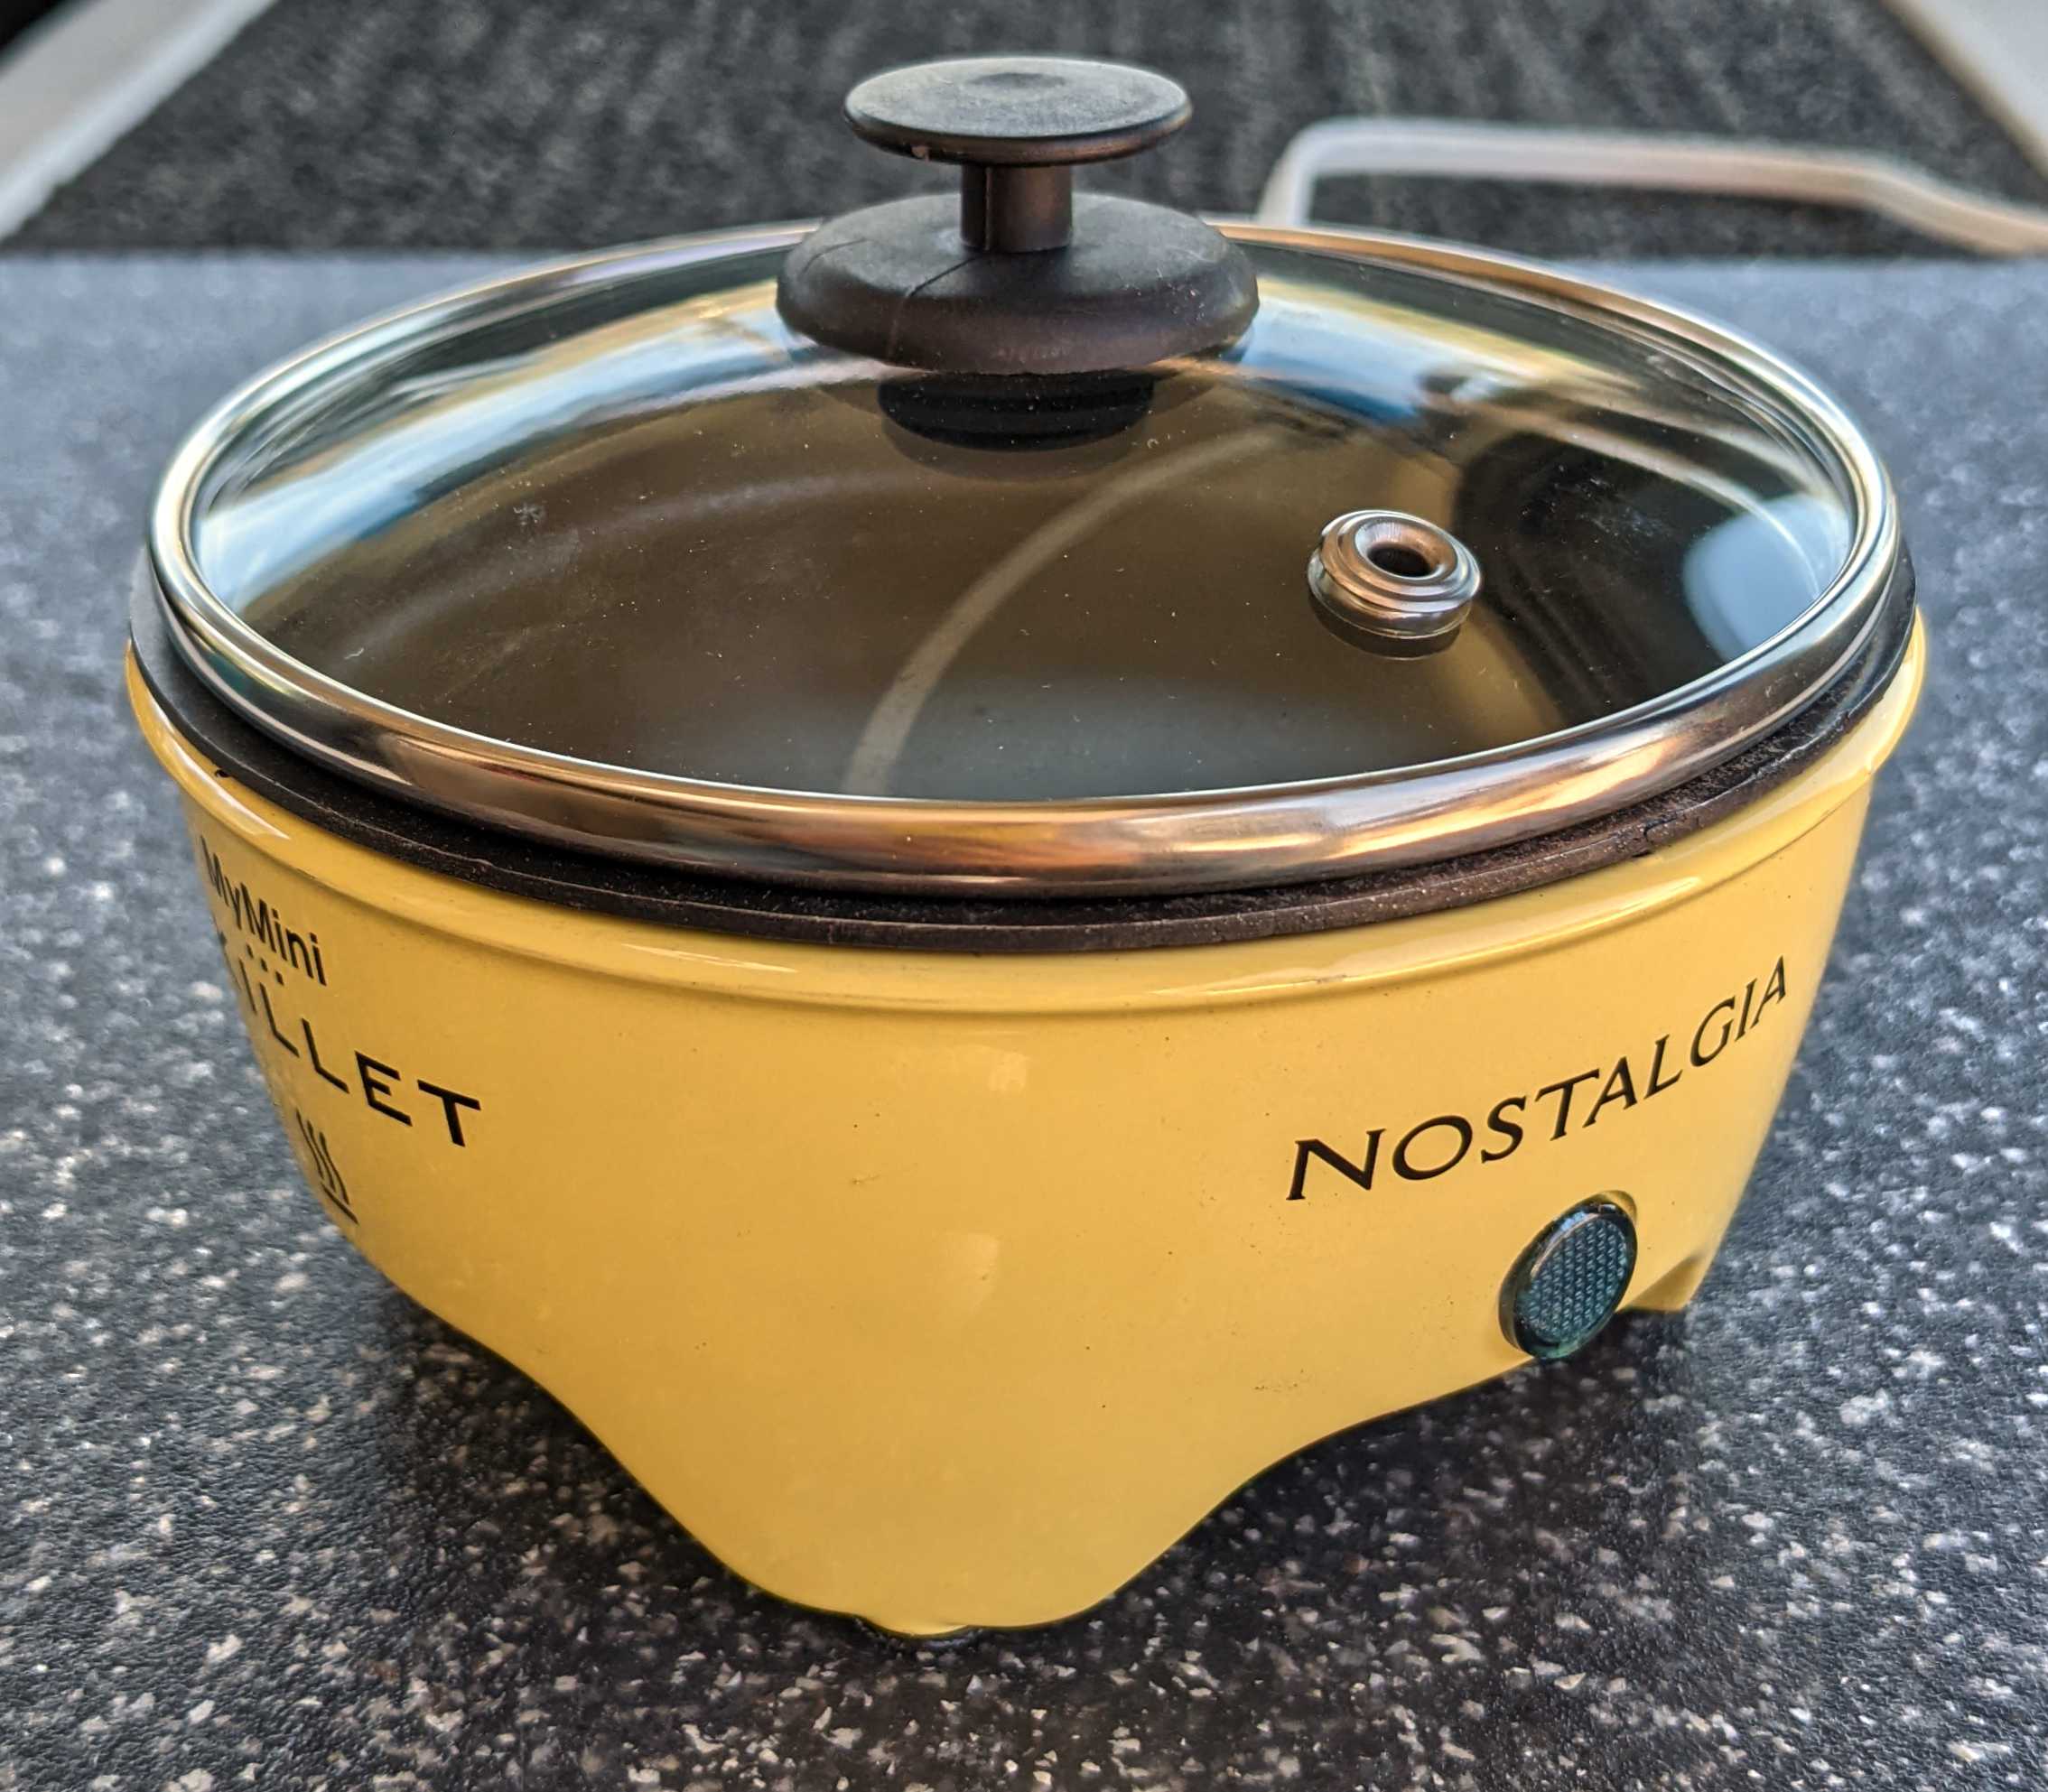 A Low-Power Multifunction Electric Mini Cooker for Nomads - Cheap RV Living